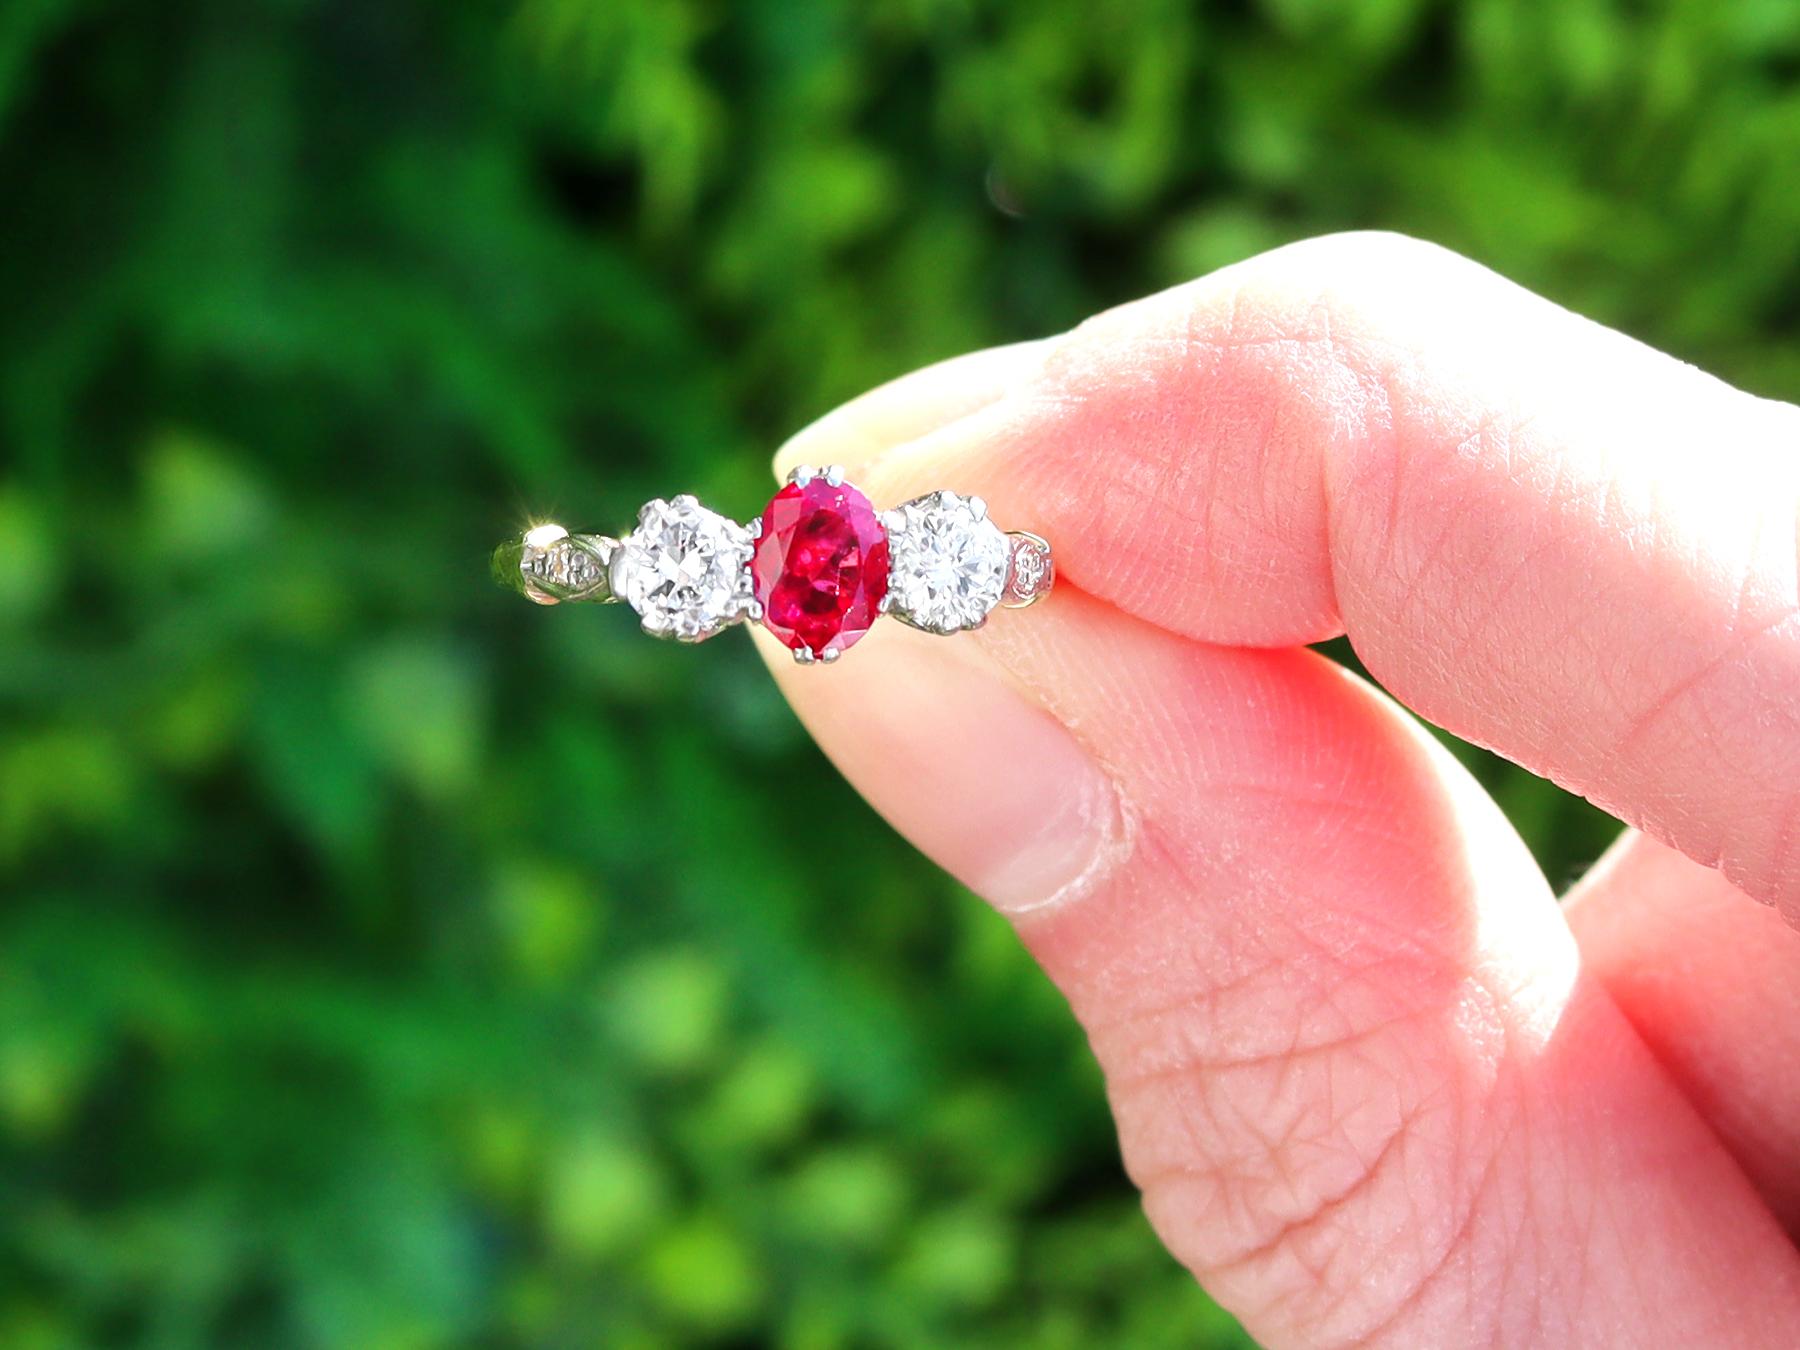 A fine and impressive vintage 0.66 carat ruby and 0.40 carat diamond, 18 karat yellow gold, white gold set, three stone/trilogy ring; an addition to our vintage jewellery and estate jewelry collections.

This fine and impressive trilogy ring has